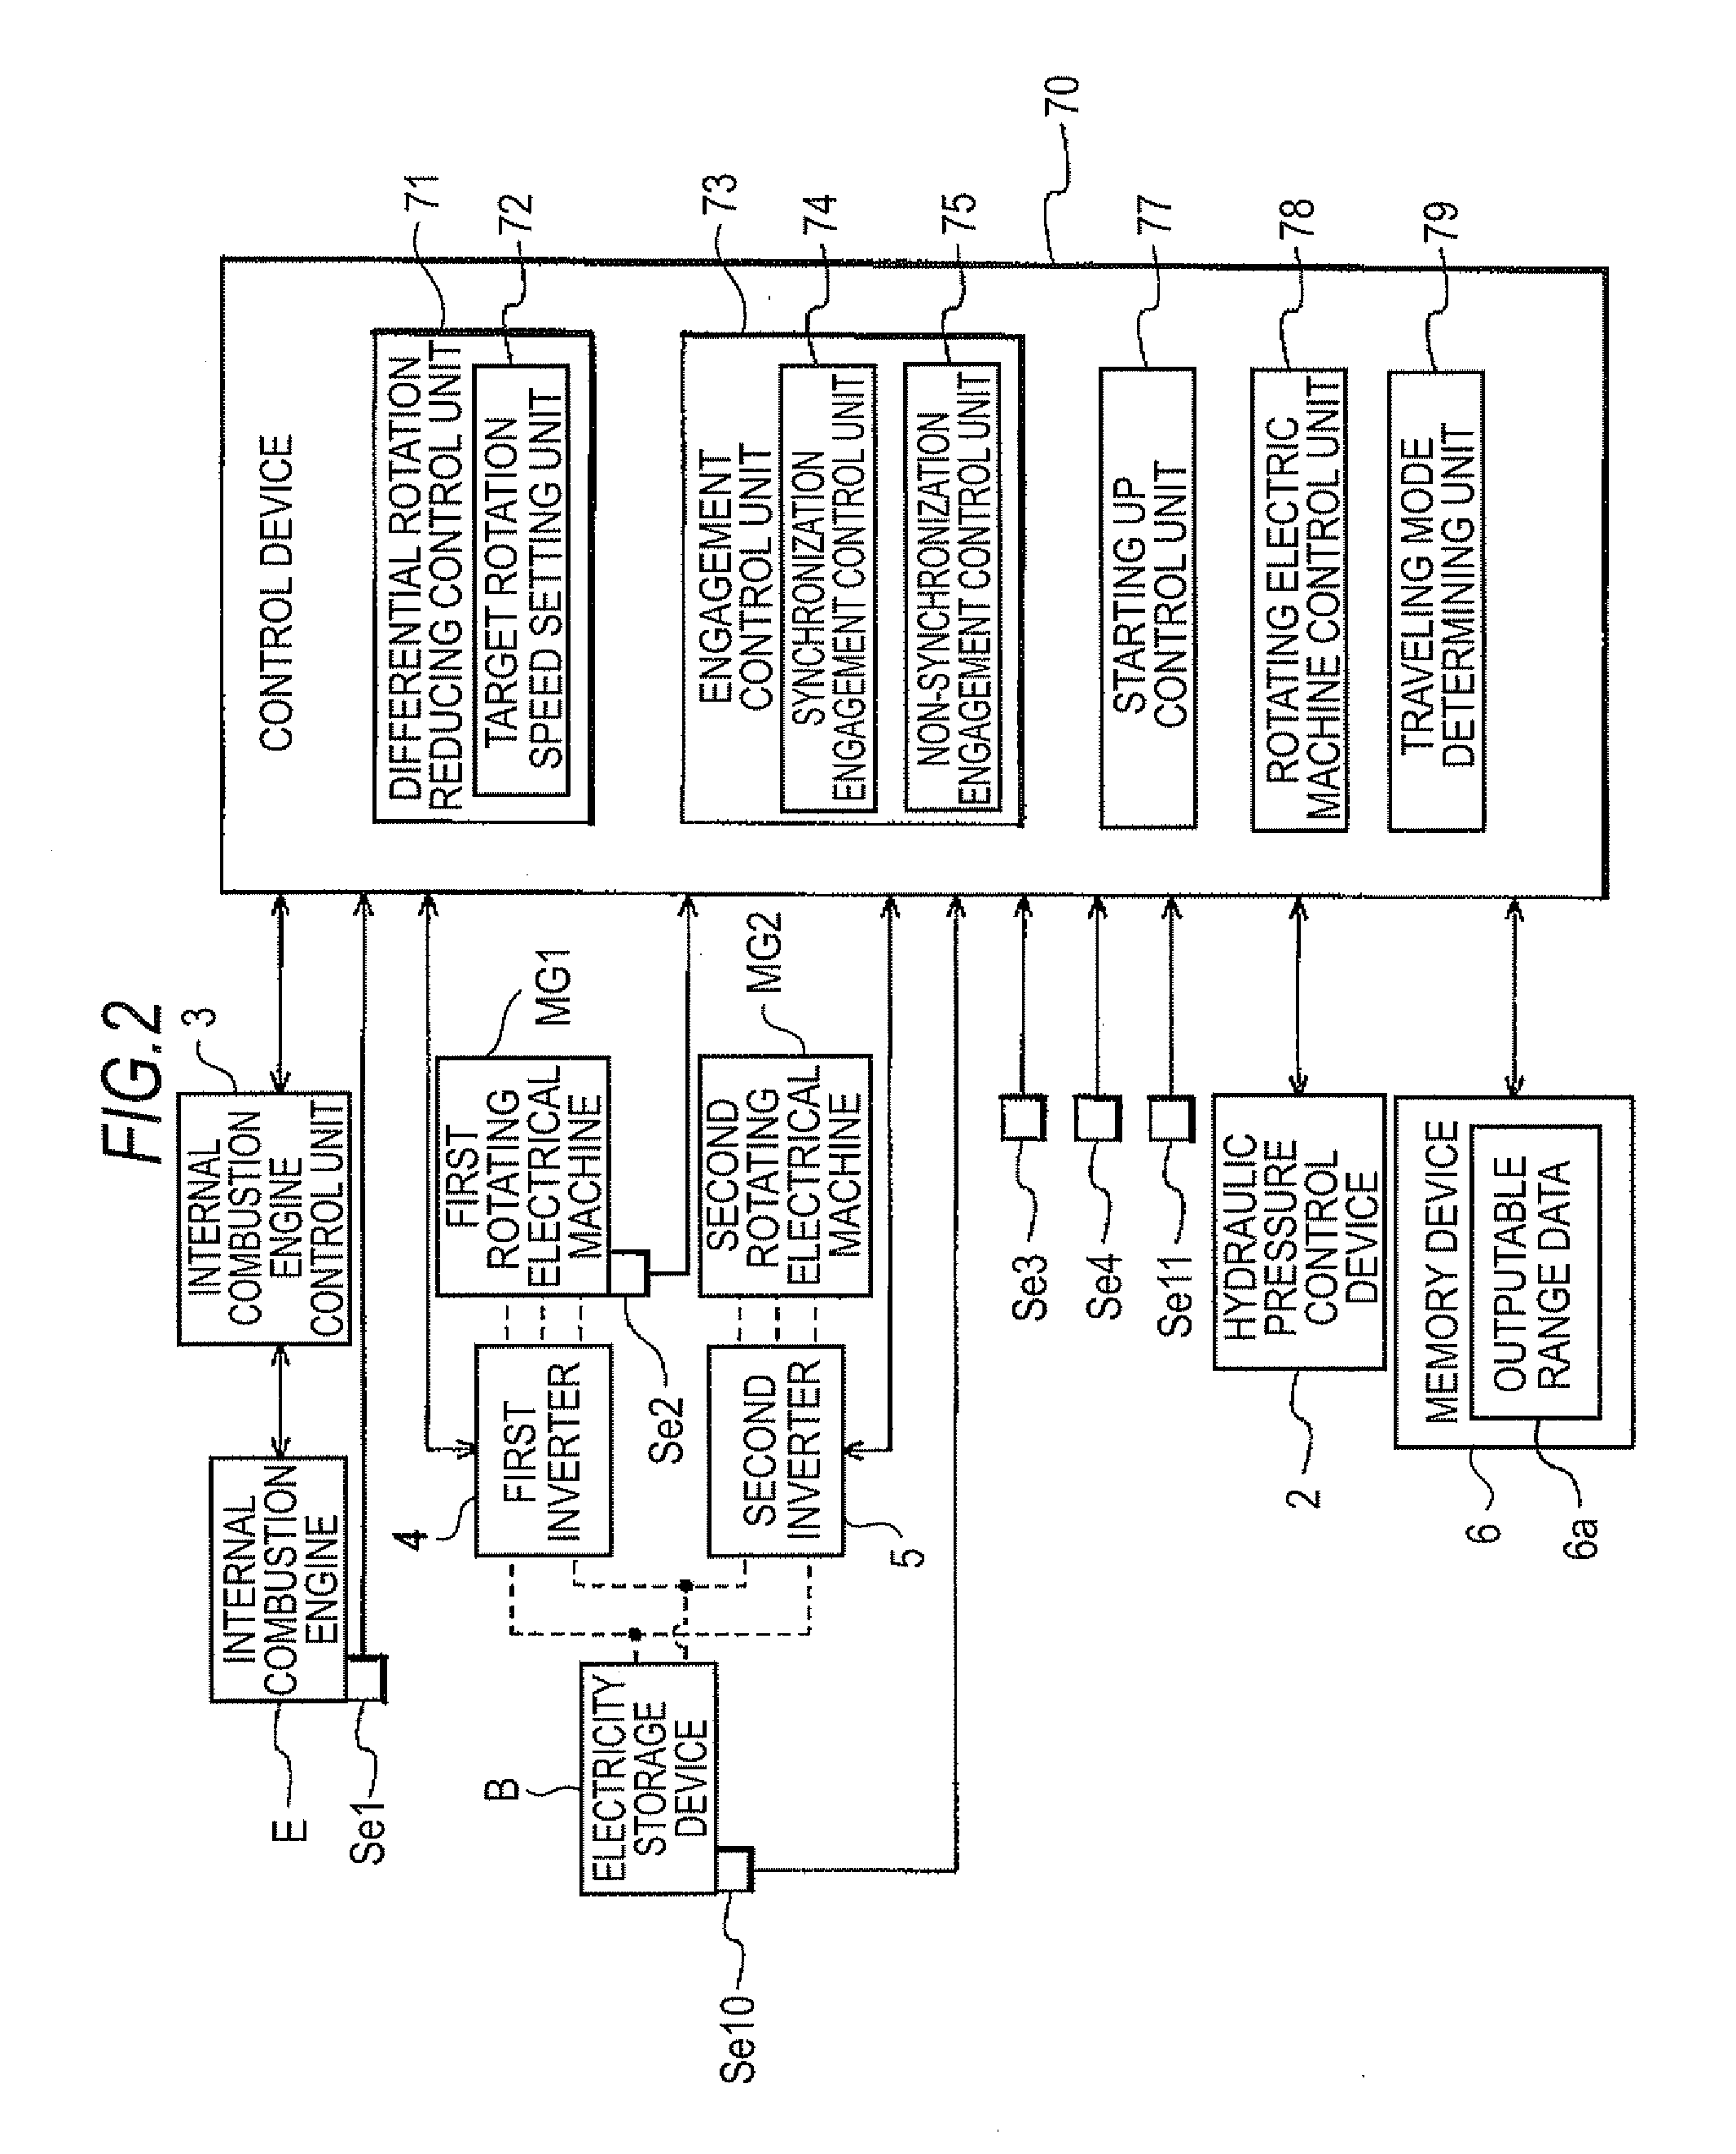 Driving device for vehicle